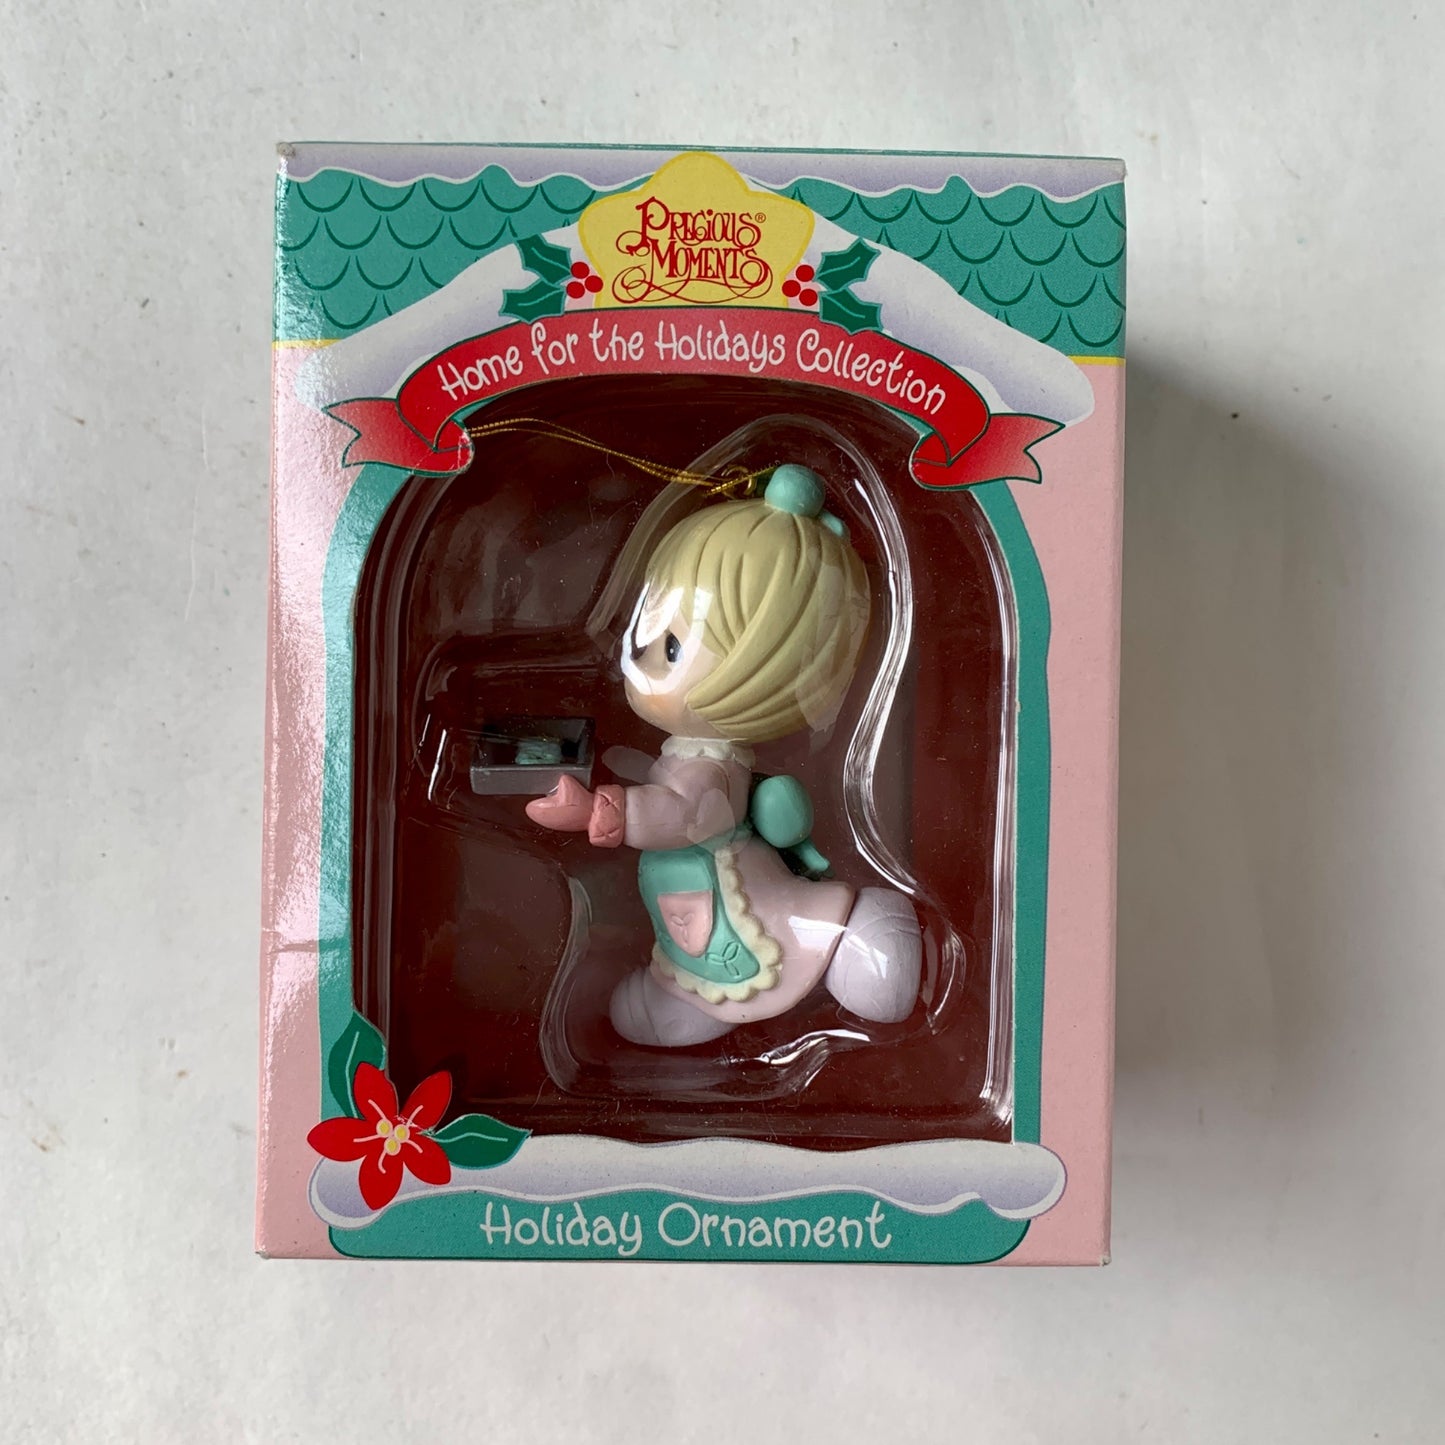 Precious Moments Home for the Holidays Collection Ornament 182370